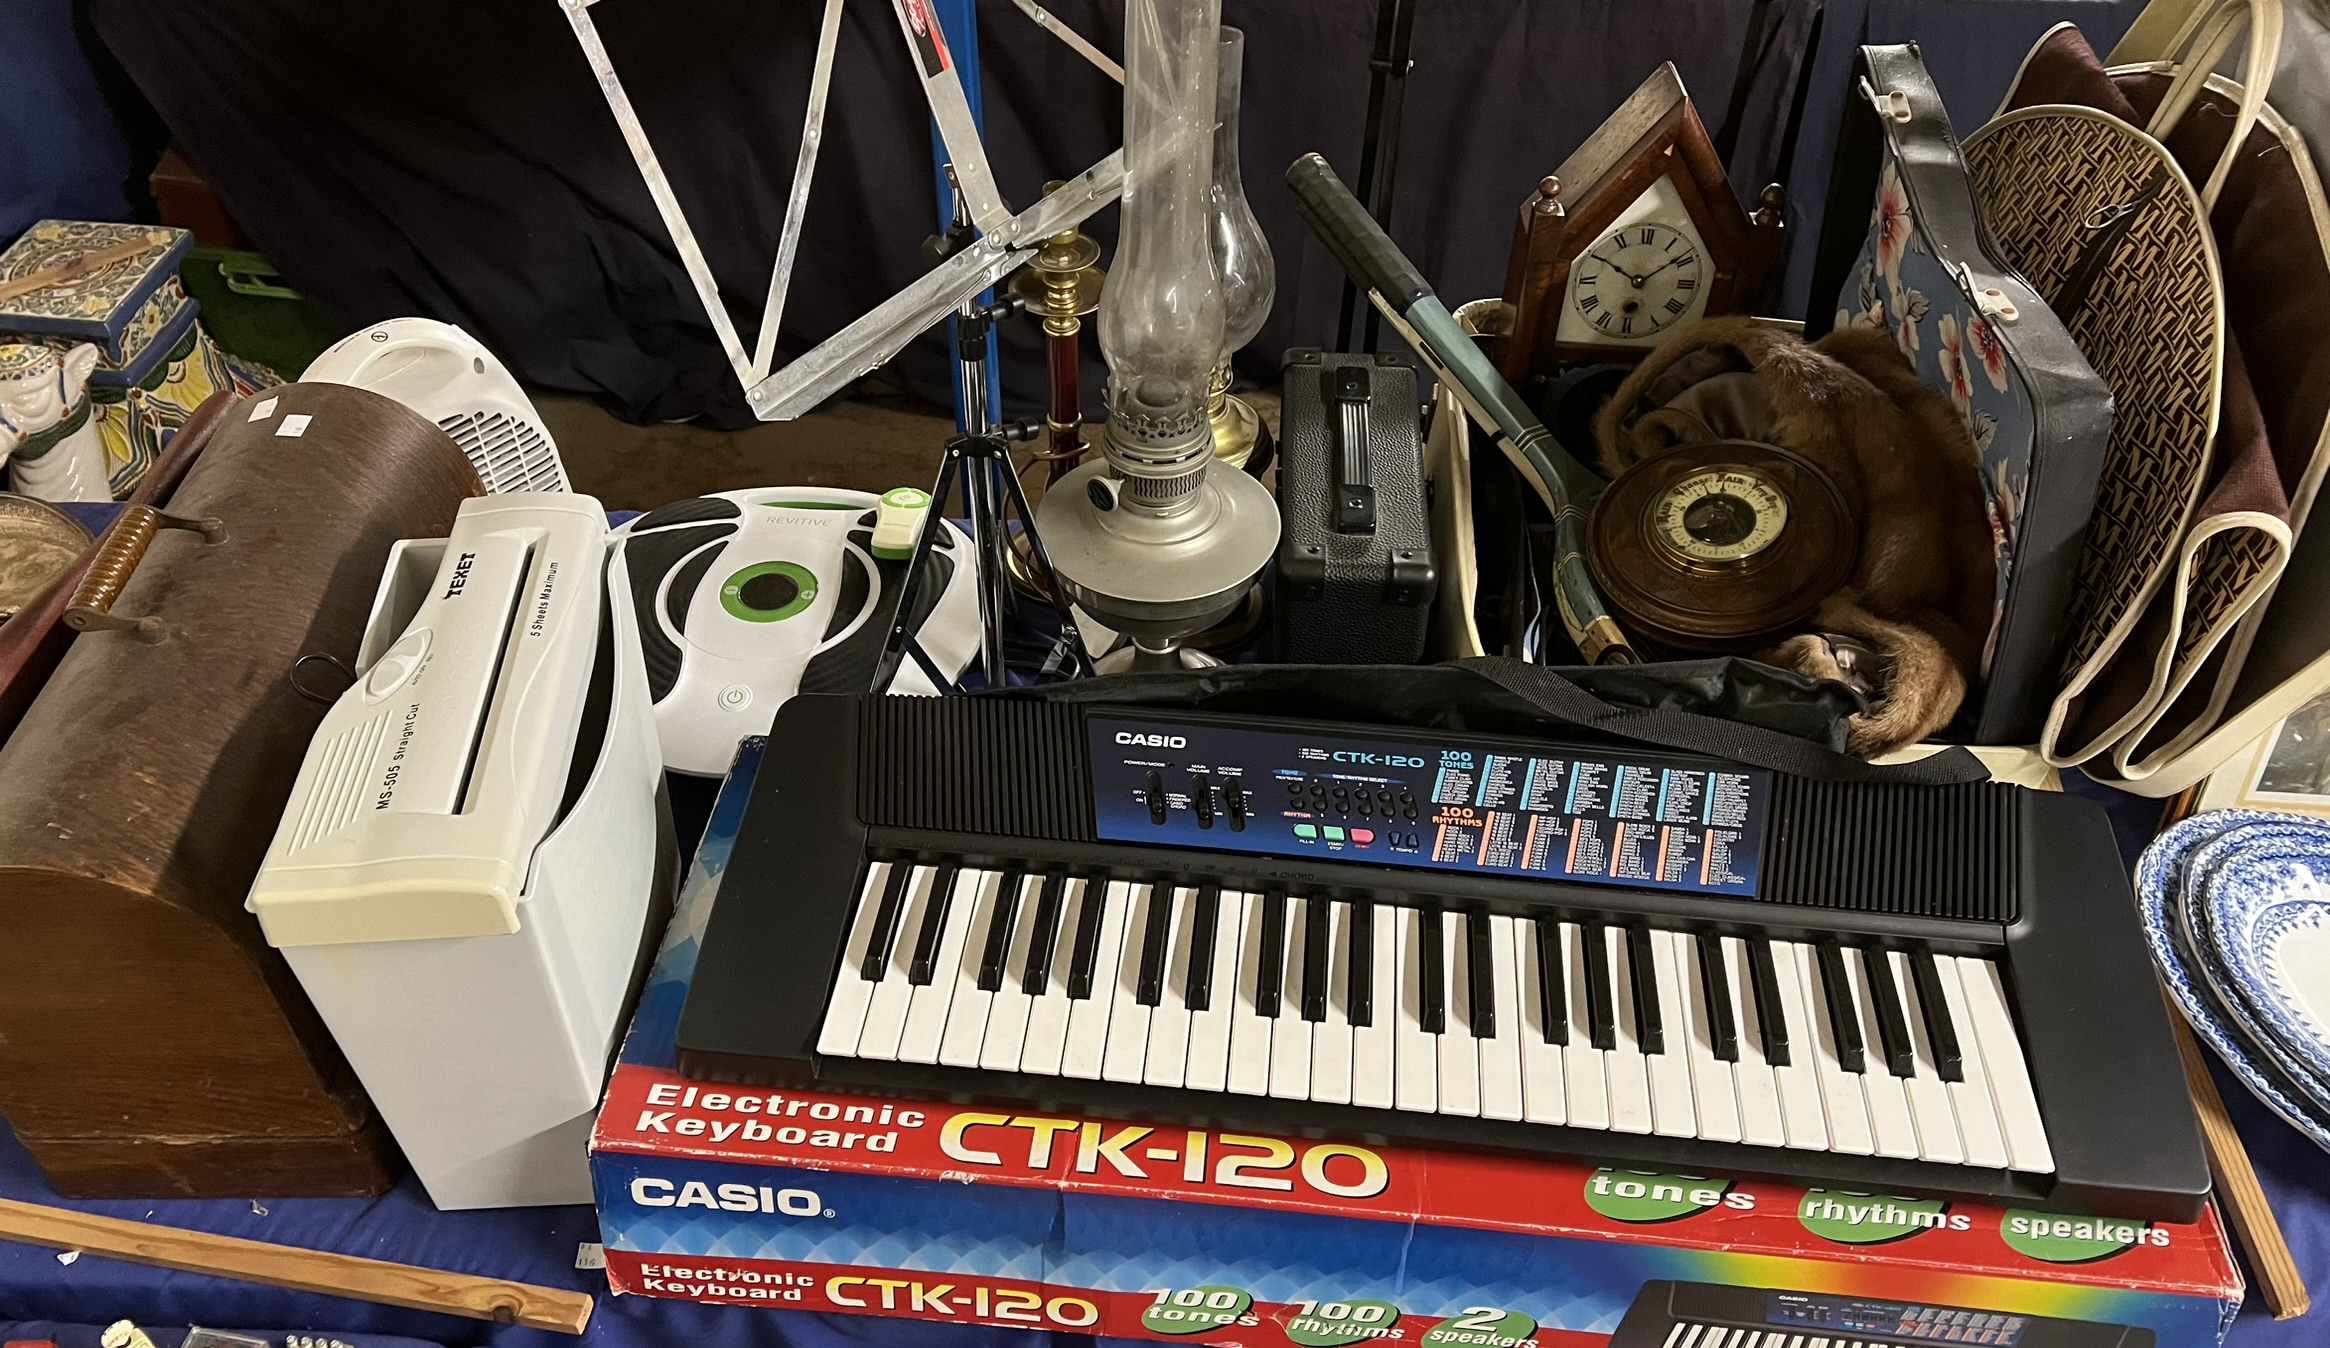 A Casio CTK-120 piano together with a Singer sewing machine, barometer, mantle clock, fur stole,